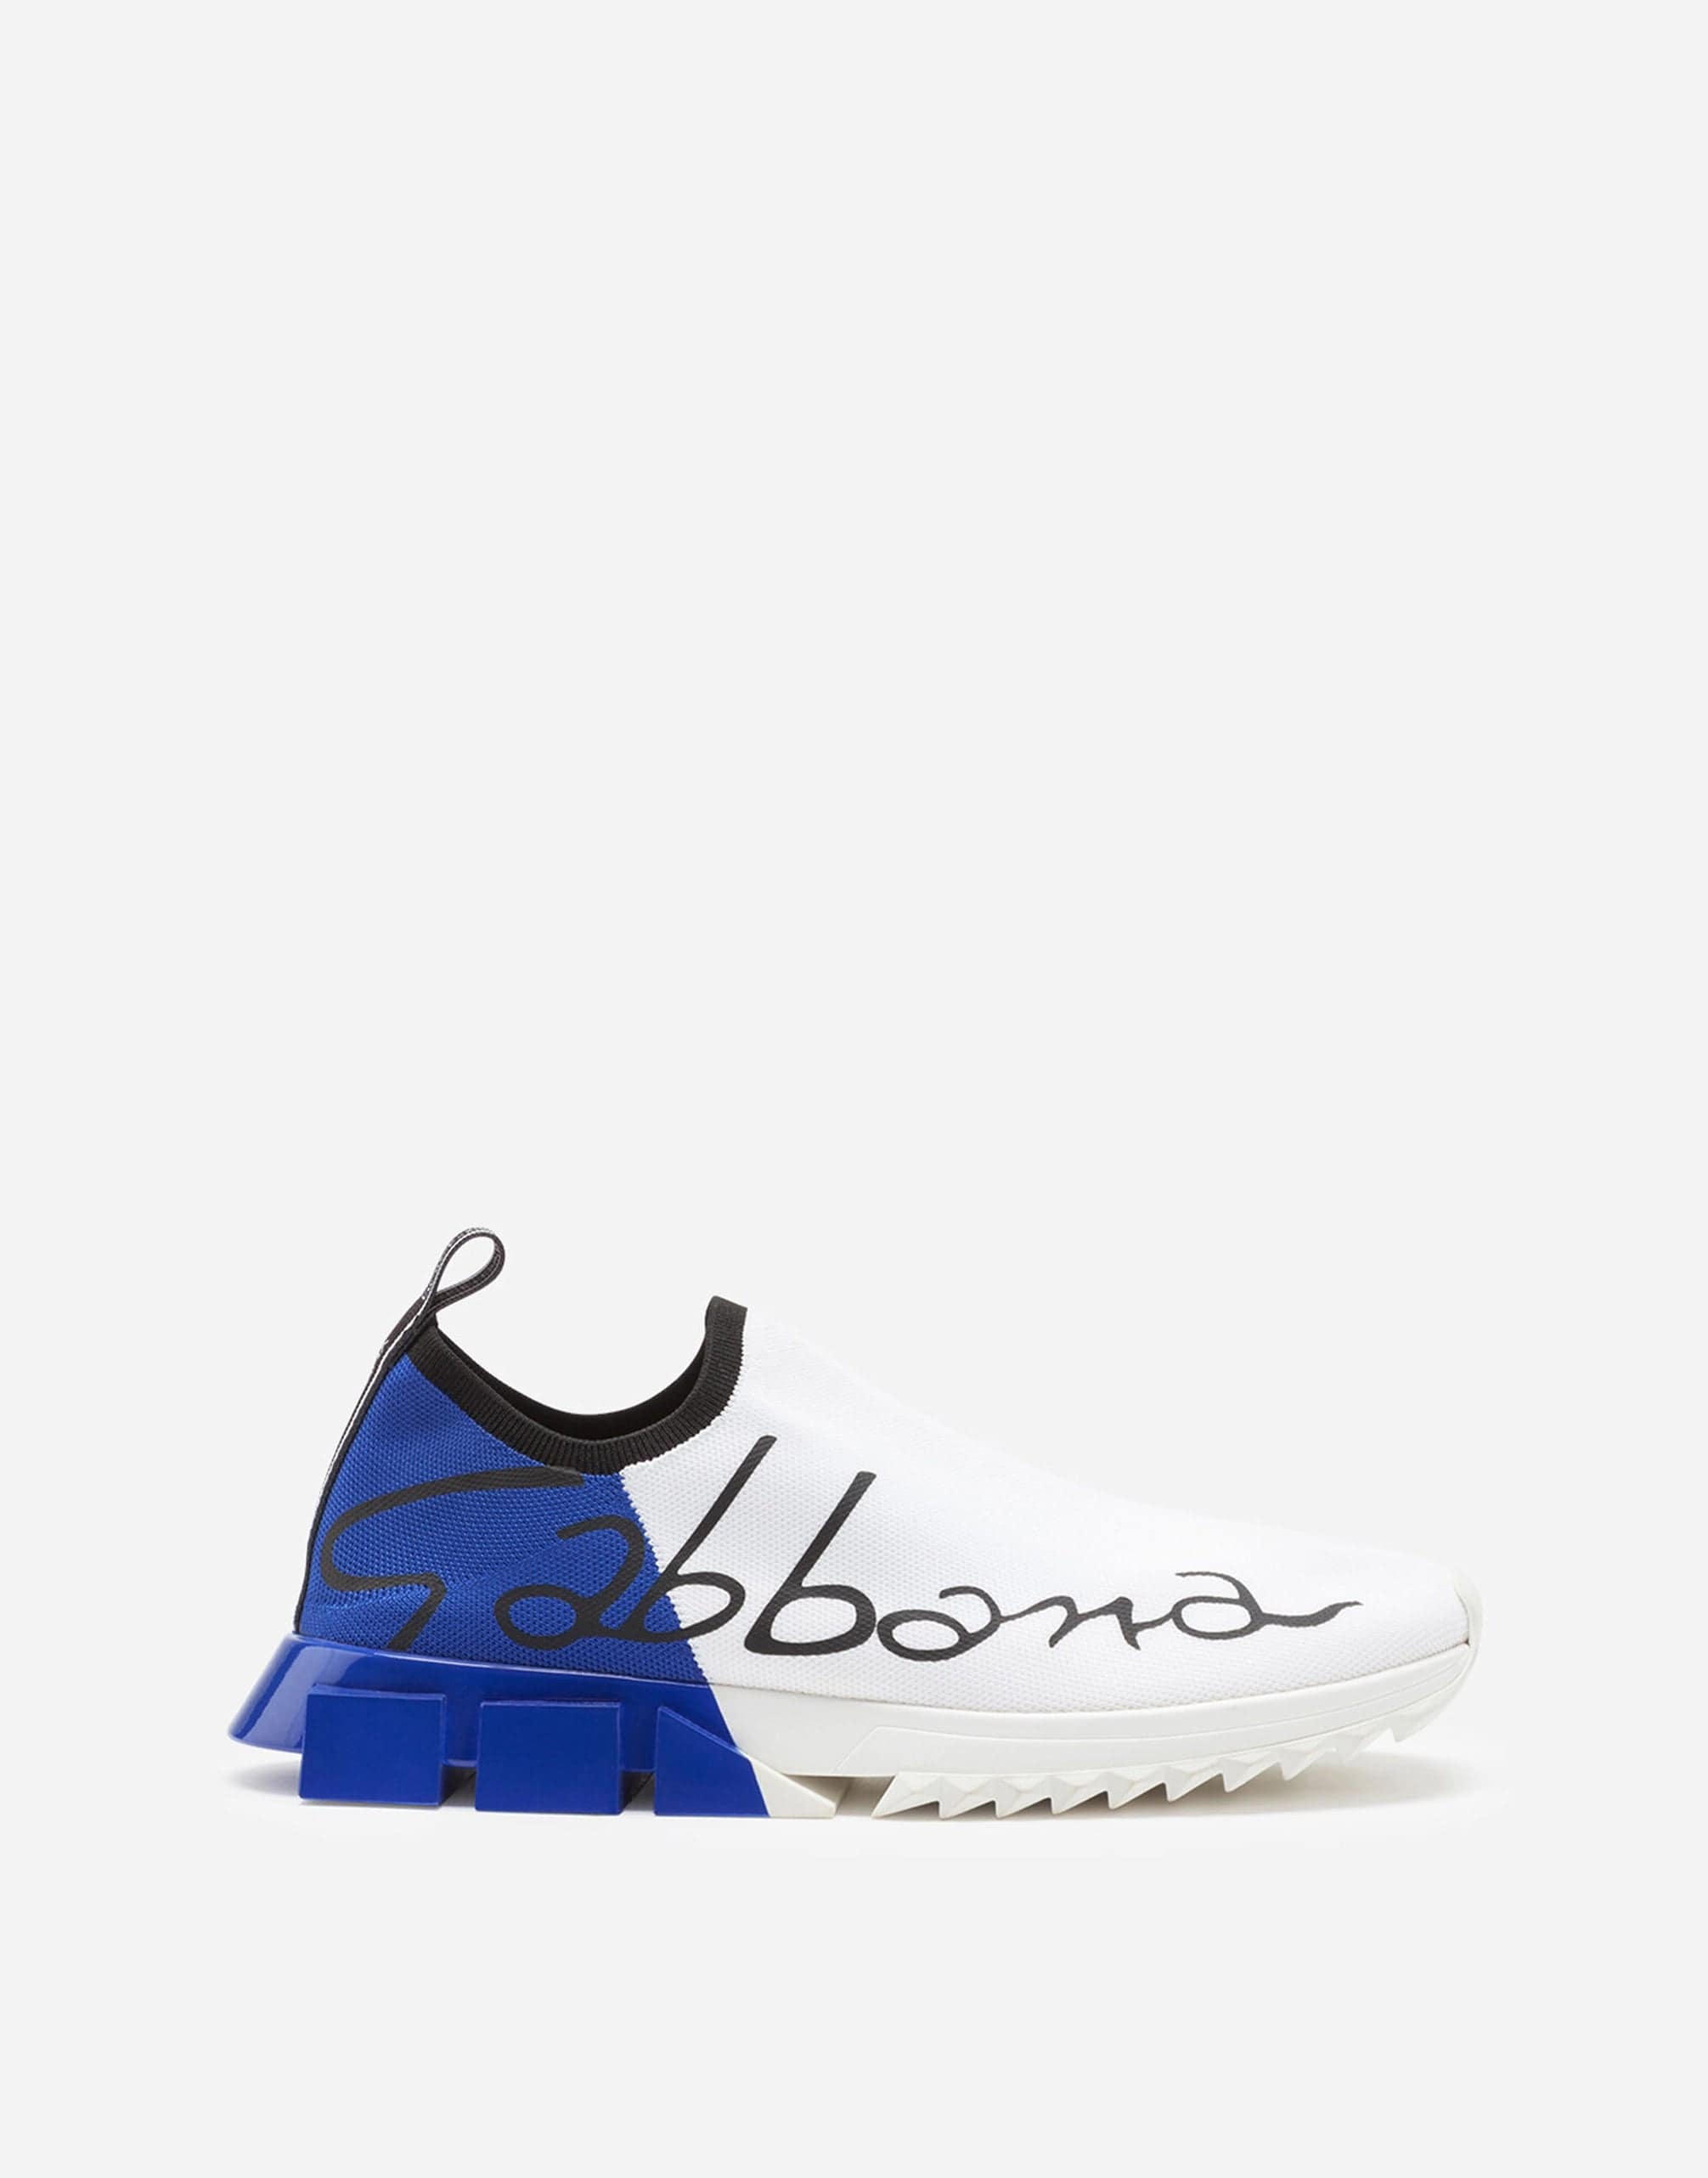 Dolce & Gabbana Stretch Mesh Sorrento Sneakers With Painted Heel